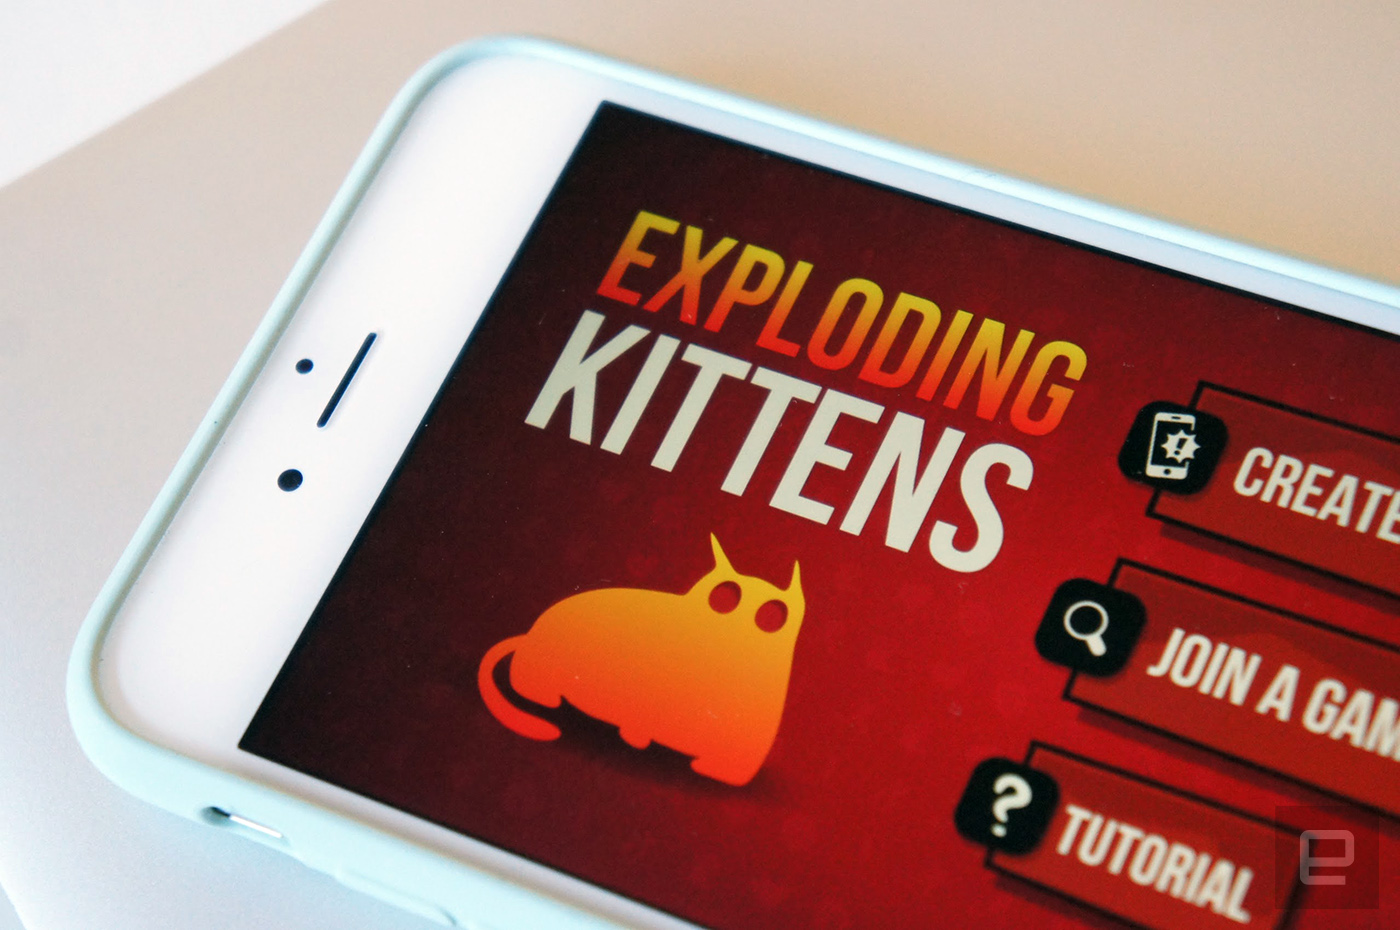 &#039;Exploding Kittens&#039; comes to iOS with local multiplayer